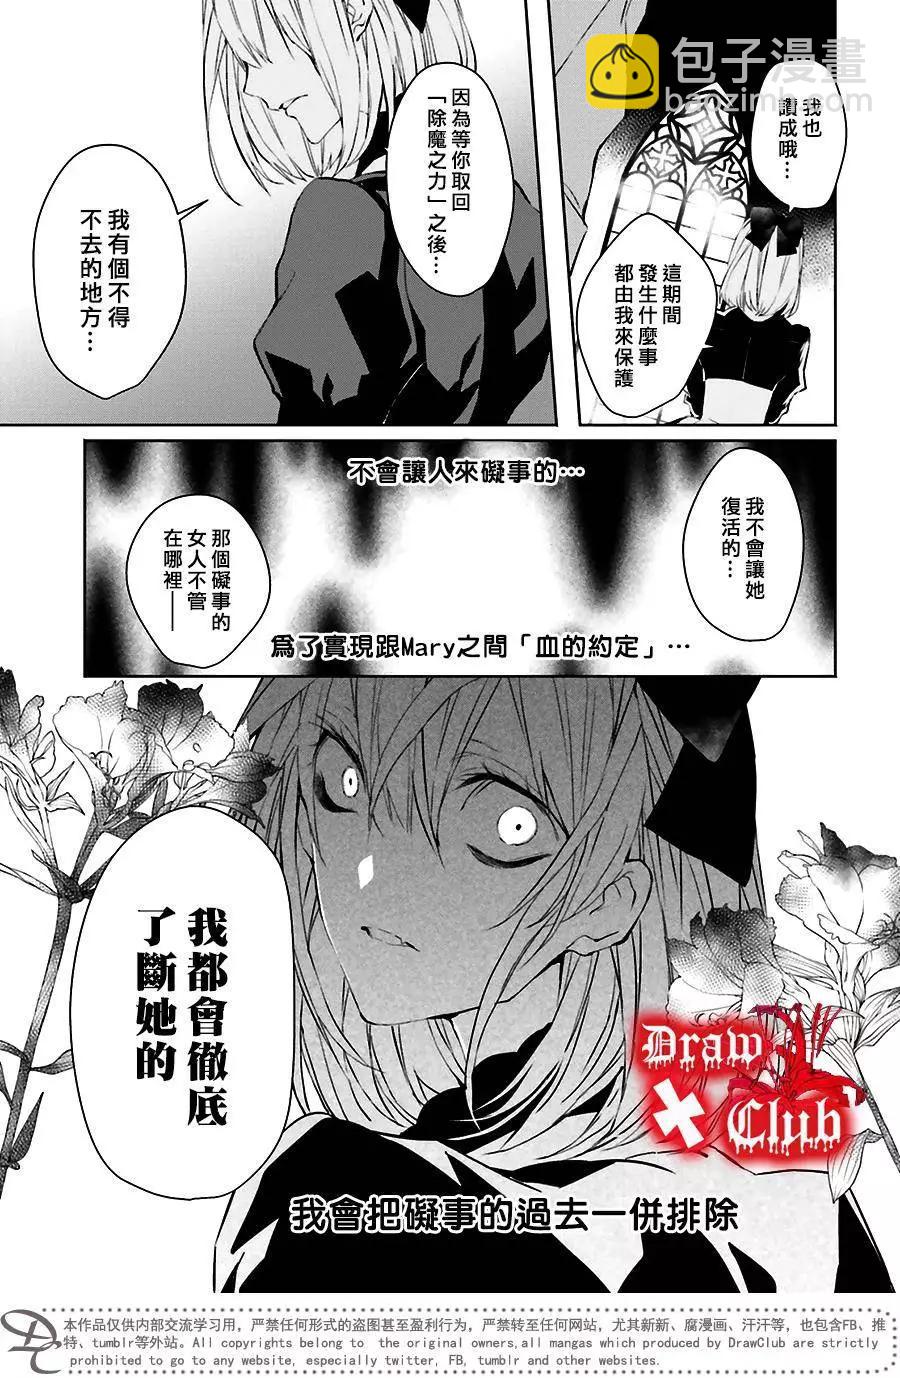 Bloody Mary - 第33回 - 6